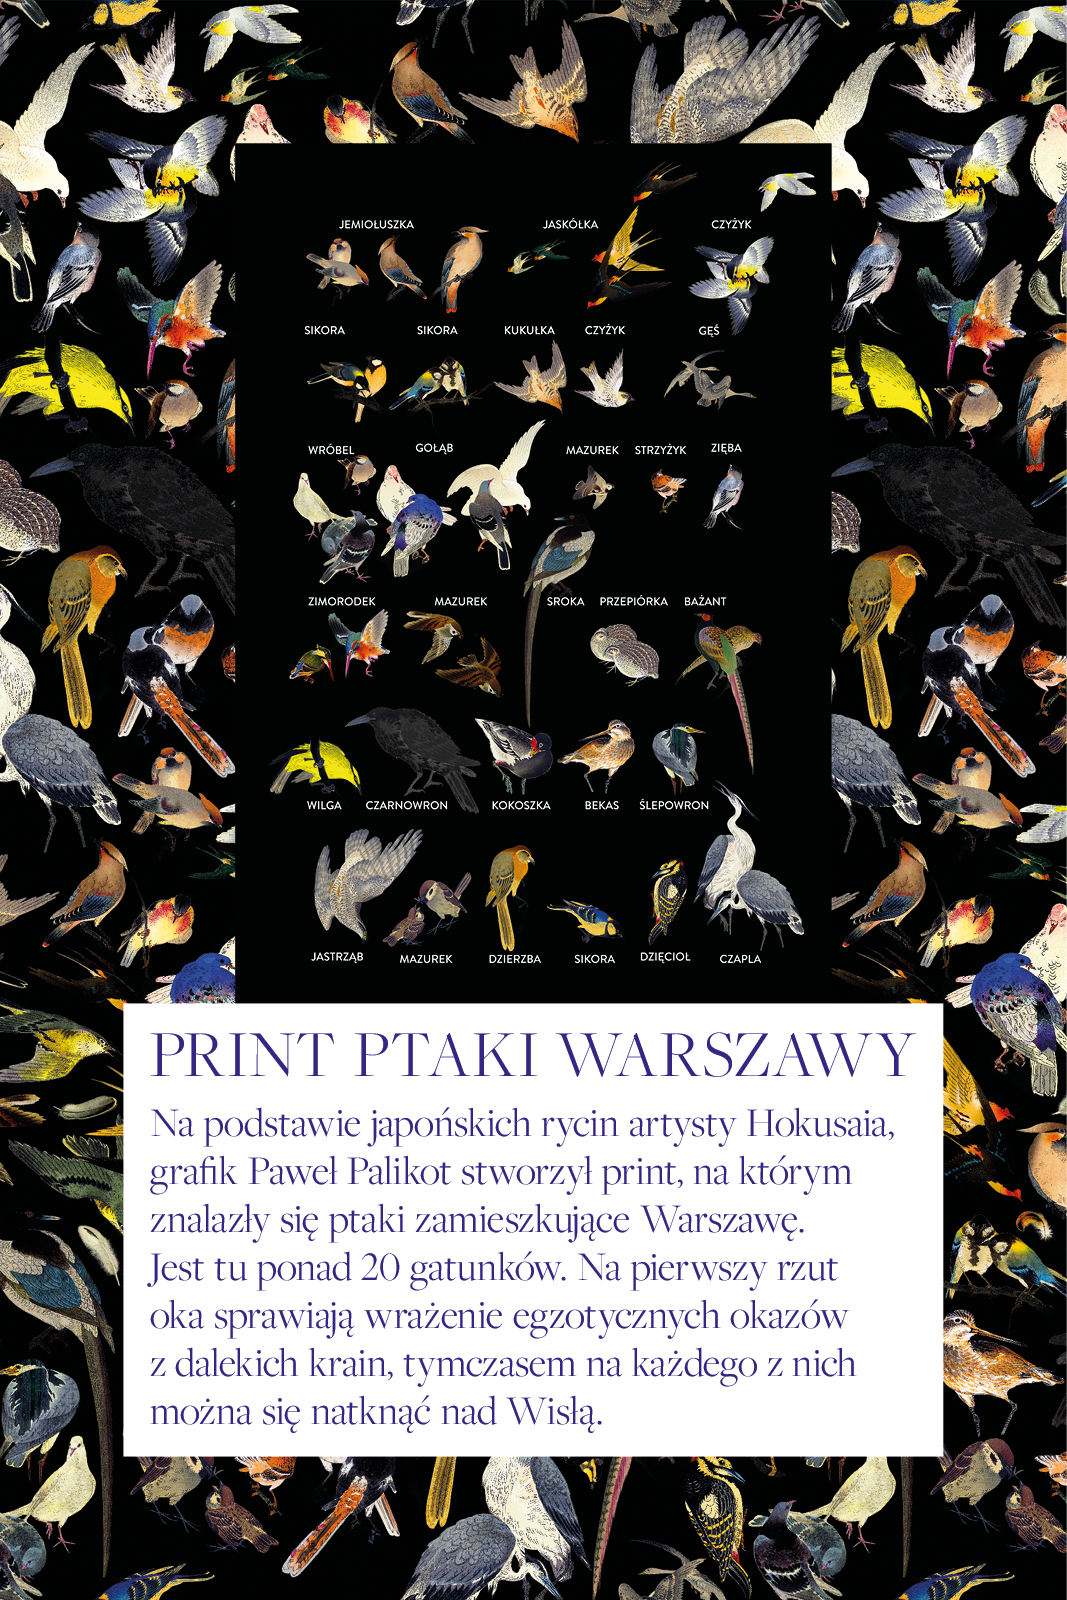 LIFE'S A STAGE birds of Warsaw print